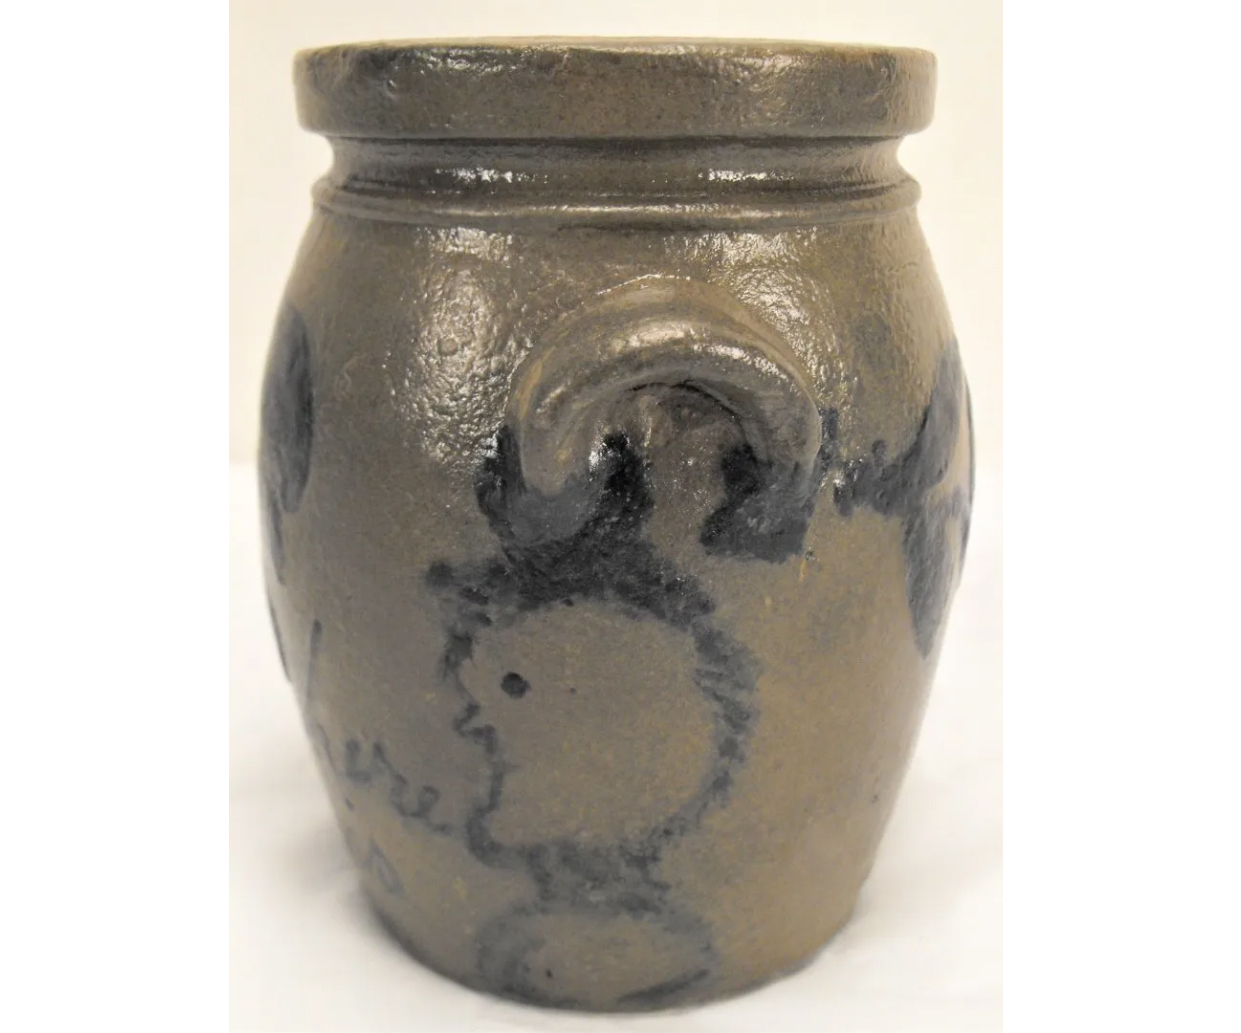 A miniature stoneware jar from the Black family pottery in southwestern Pennsylvania sold for $6,000 plus the buyer’s premium in January 2019. Image courtesy of Carey Auctions and LiveAuctioneers.